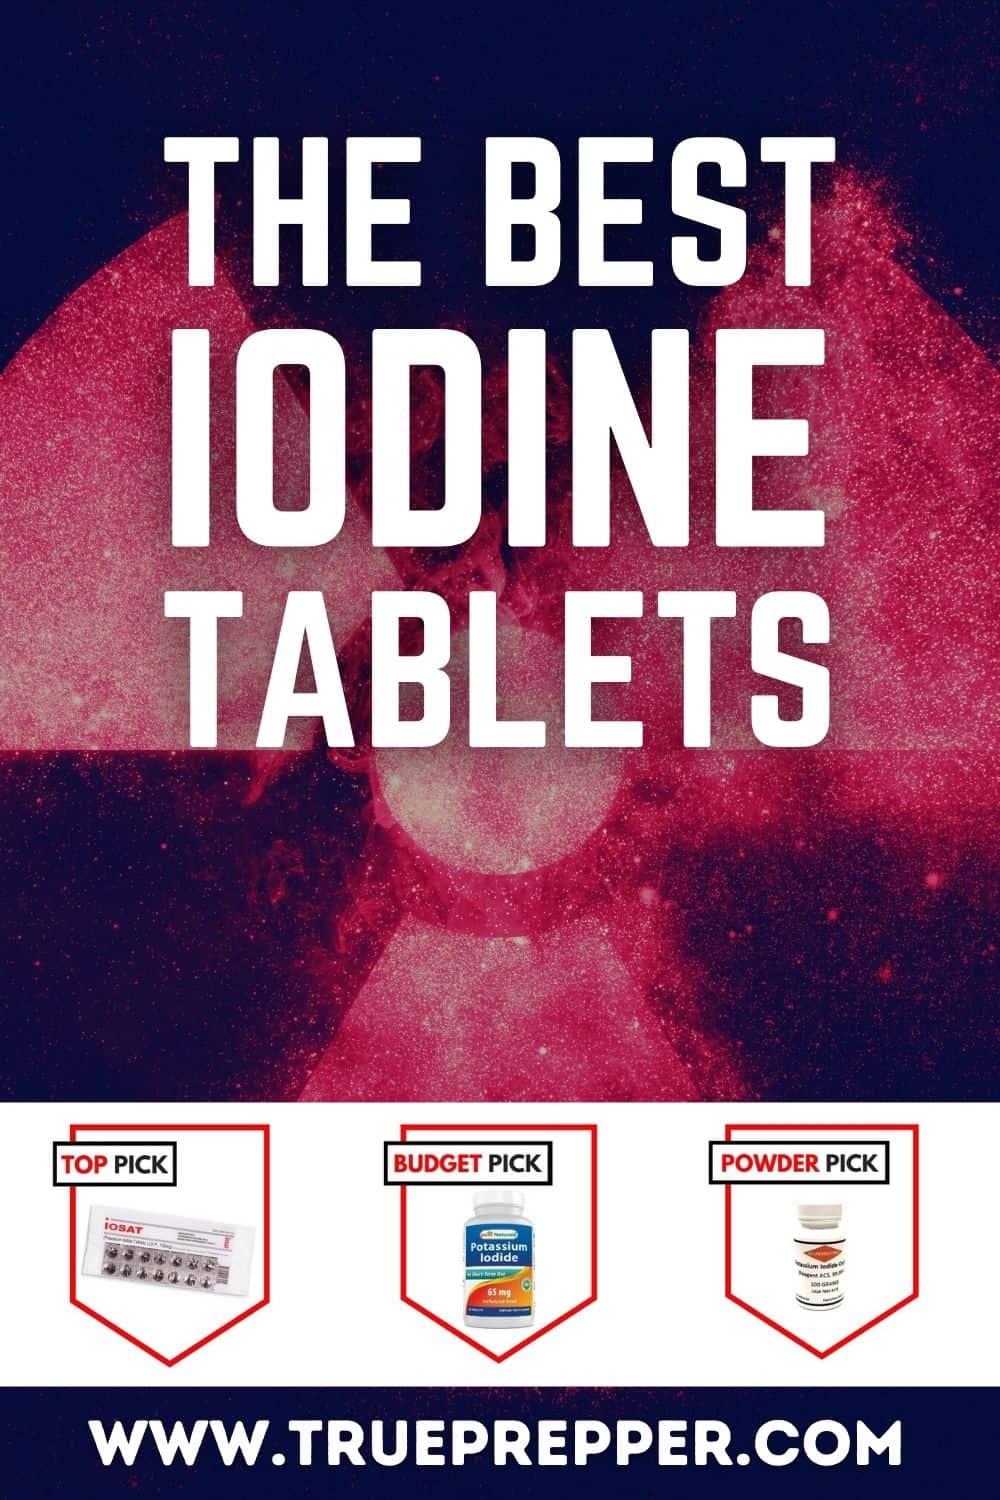 The Best Iodine Tablets (Potassium Iodide) for Nuclear Fallout Radiation